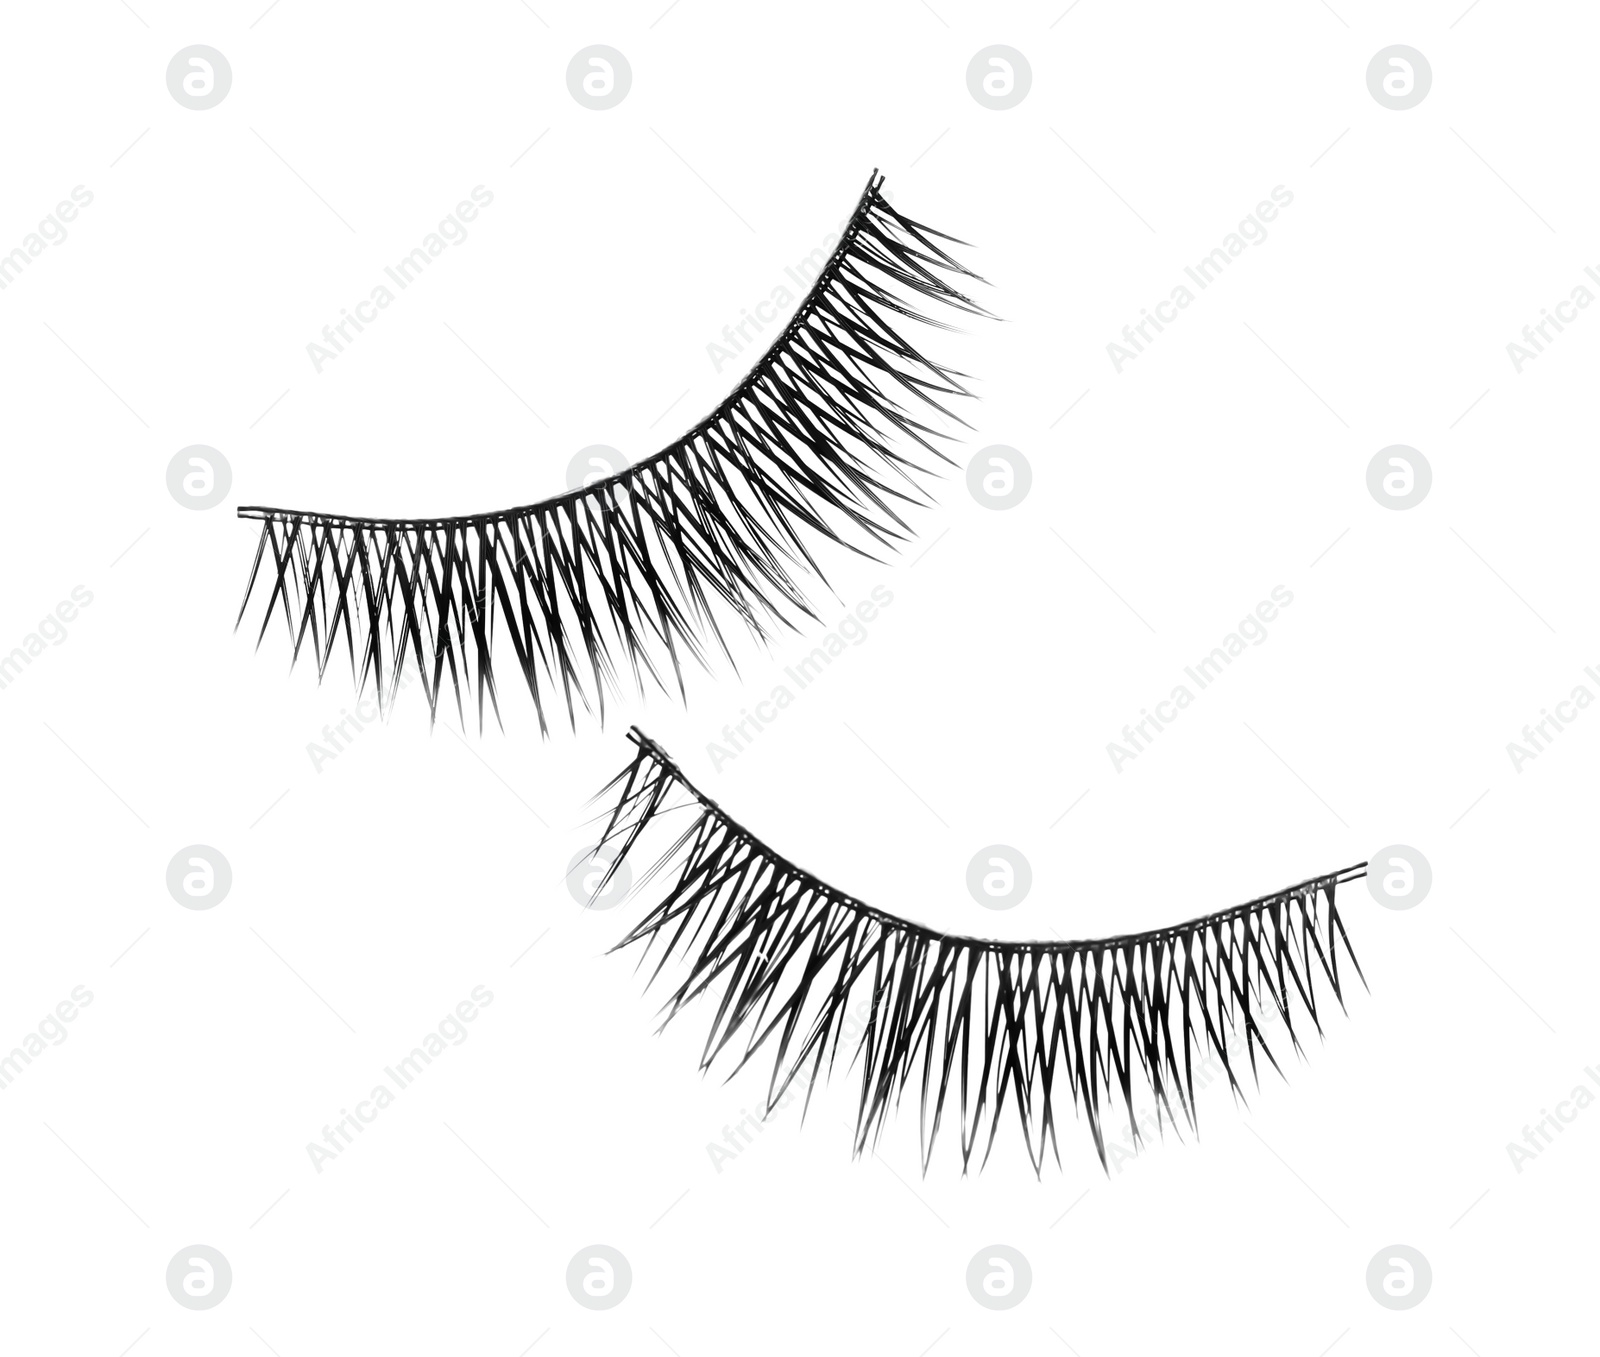 Photo of Fake eyelashes on white background, top view. Makeup product